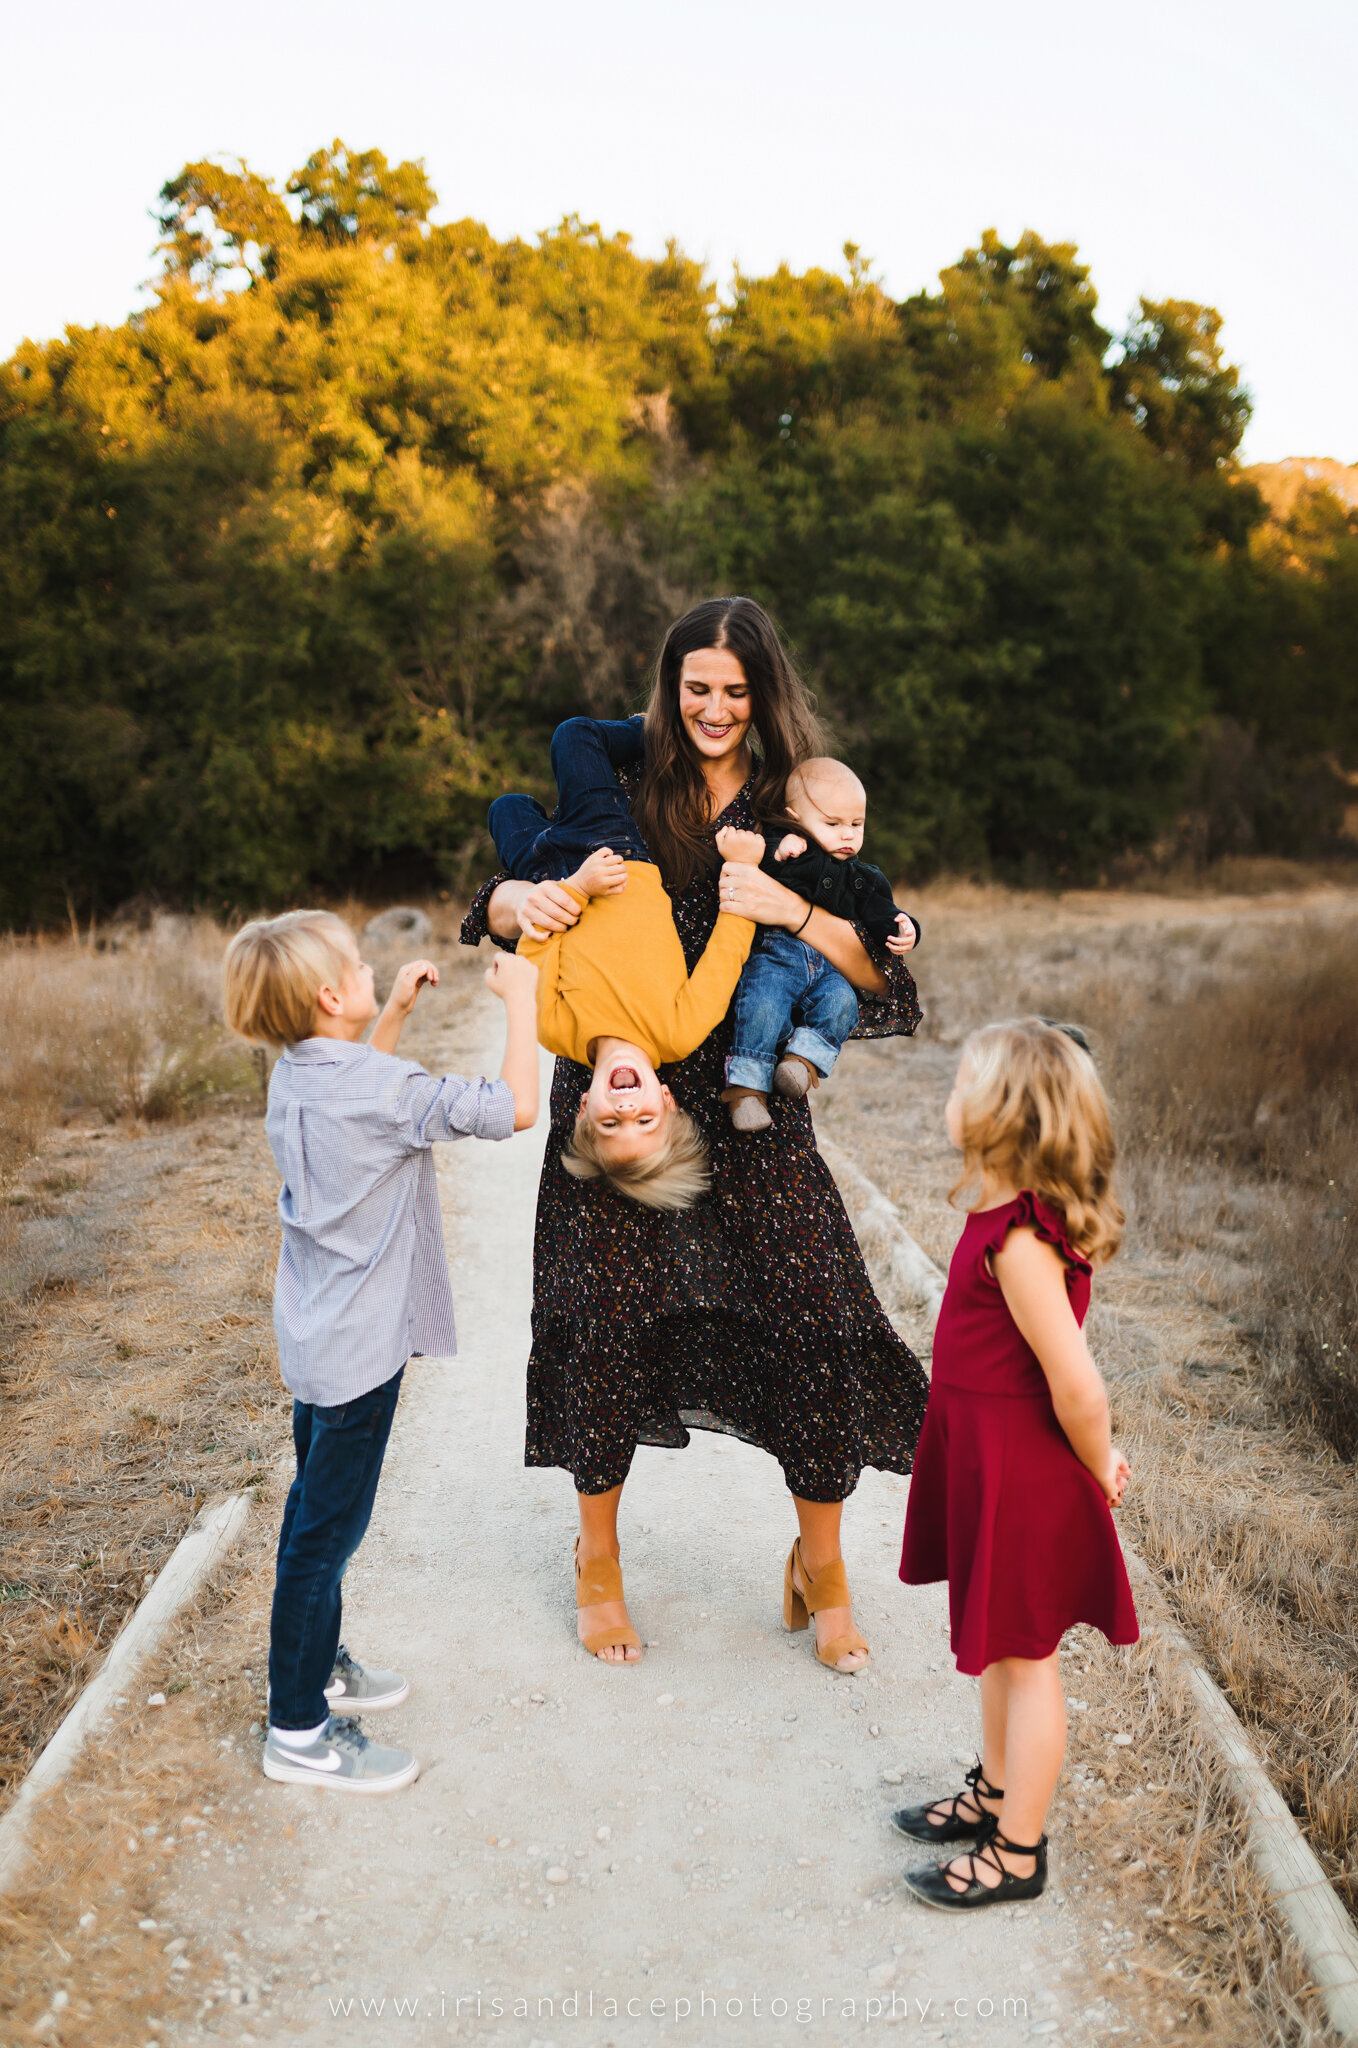 Authentic Unposed Family Photos in Northern California and SF Bay Area  |  Iris and Lace Photography